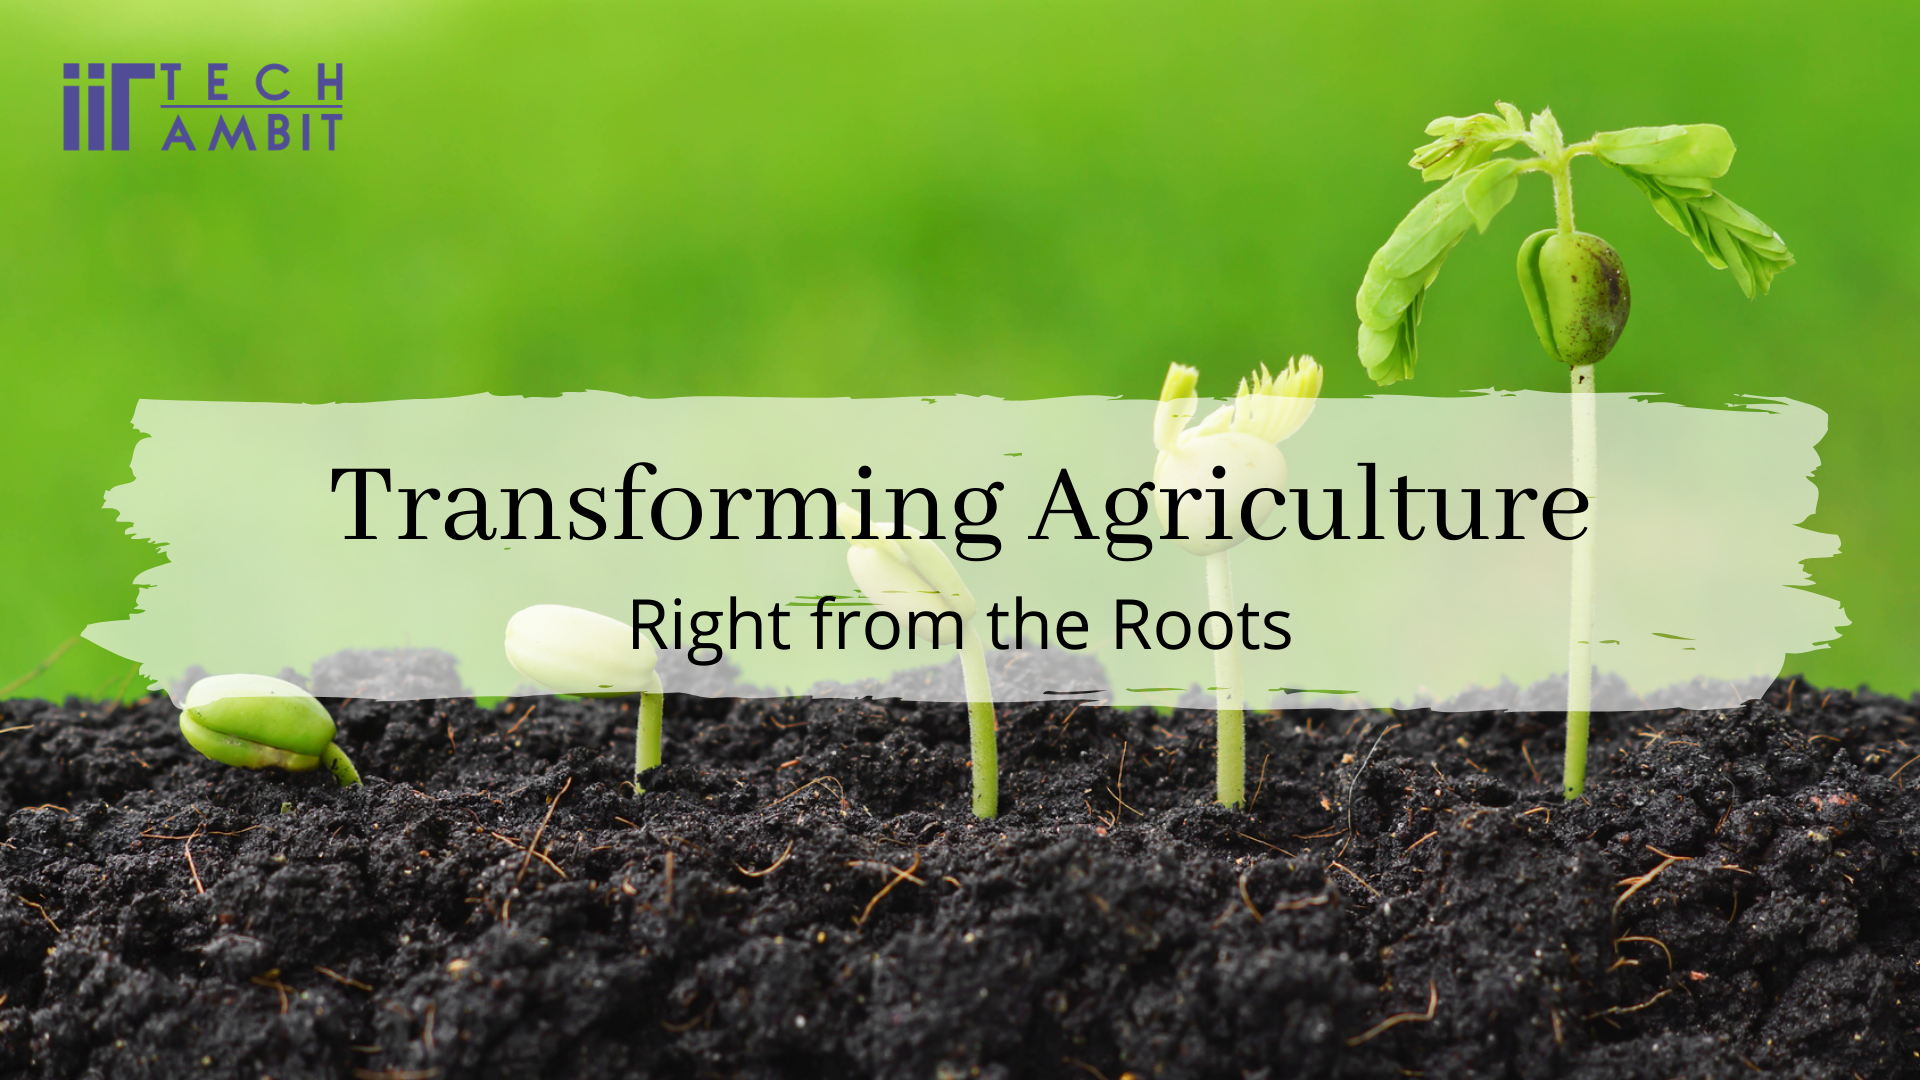 Transforming Agriculture - Right from the Roots